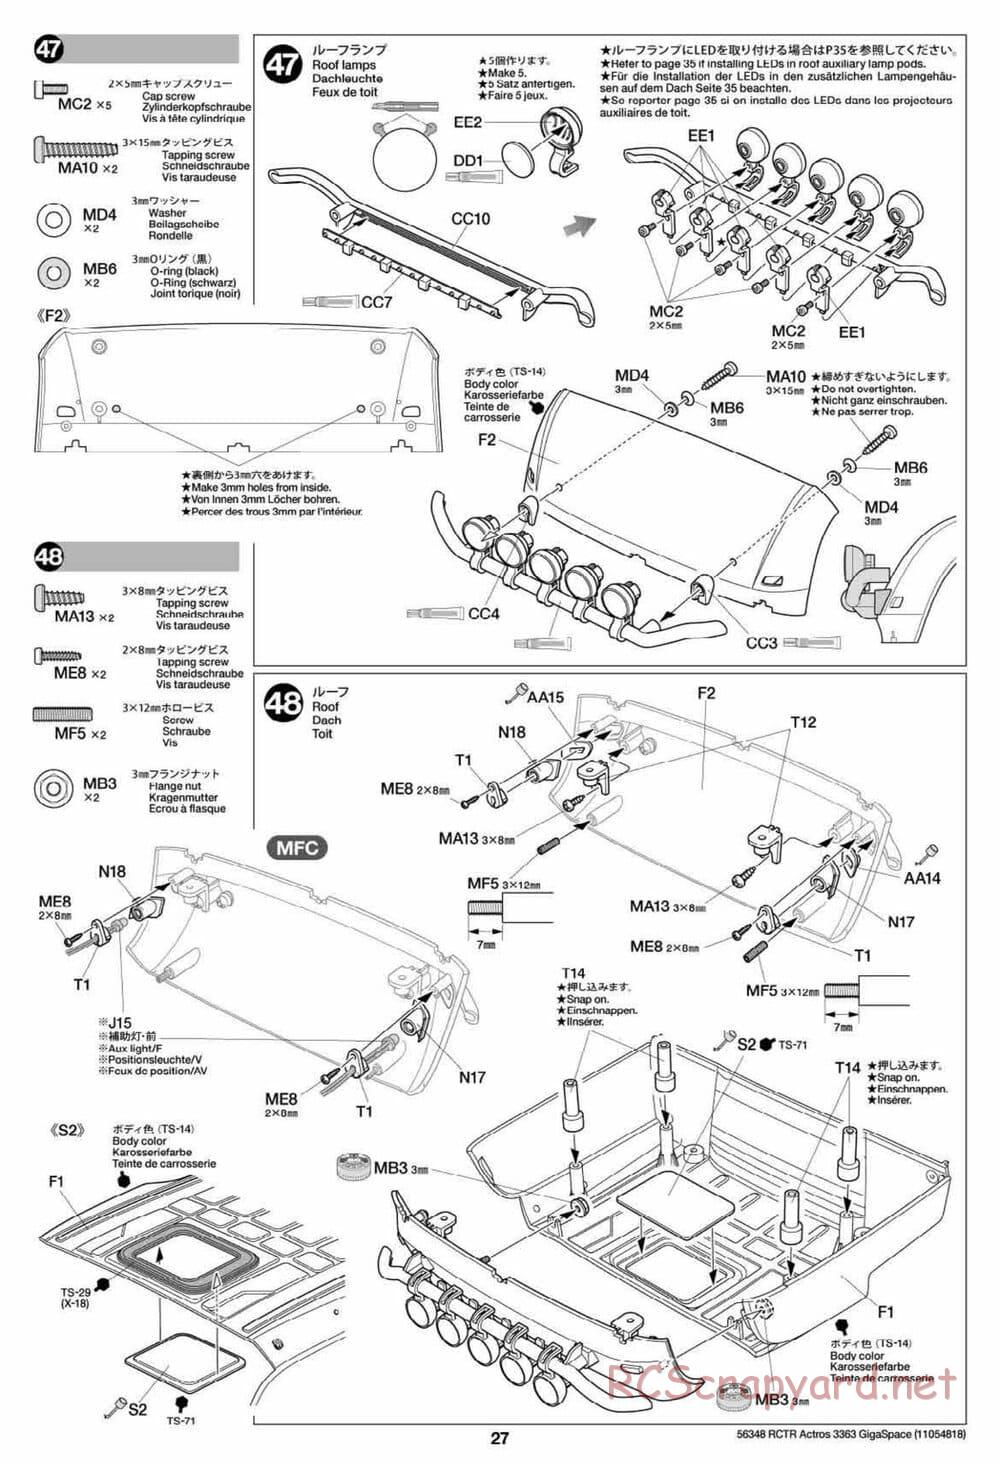 Tamiya - Mercedes-Benz Actros 3363 6x4 GigaSpace Tractor Truck Chassis - Manual - Page 27